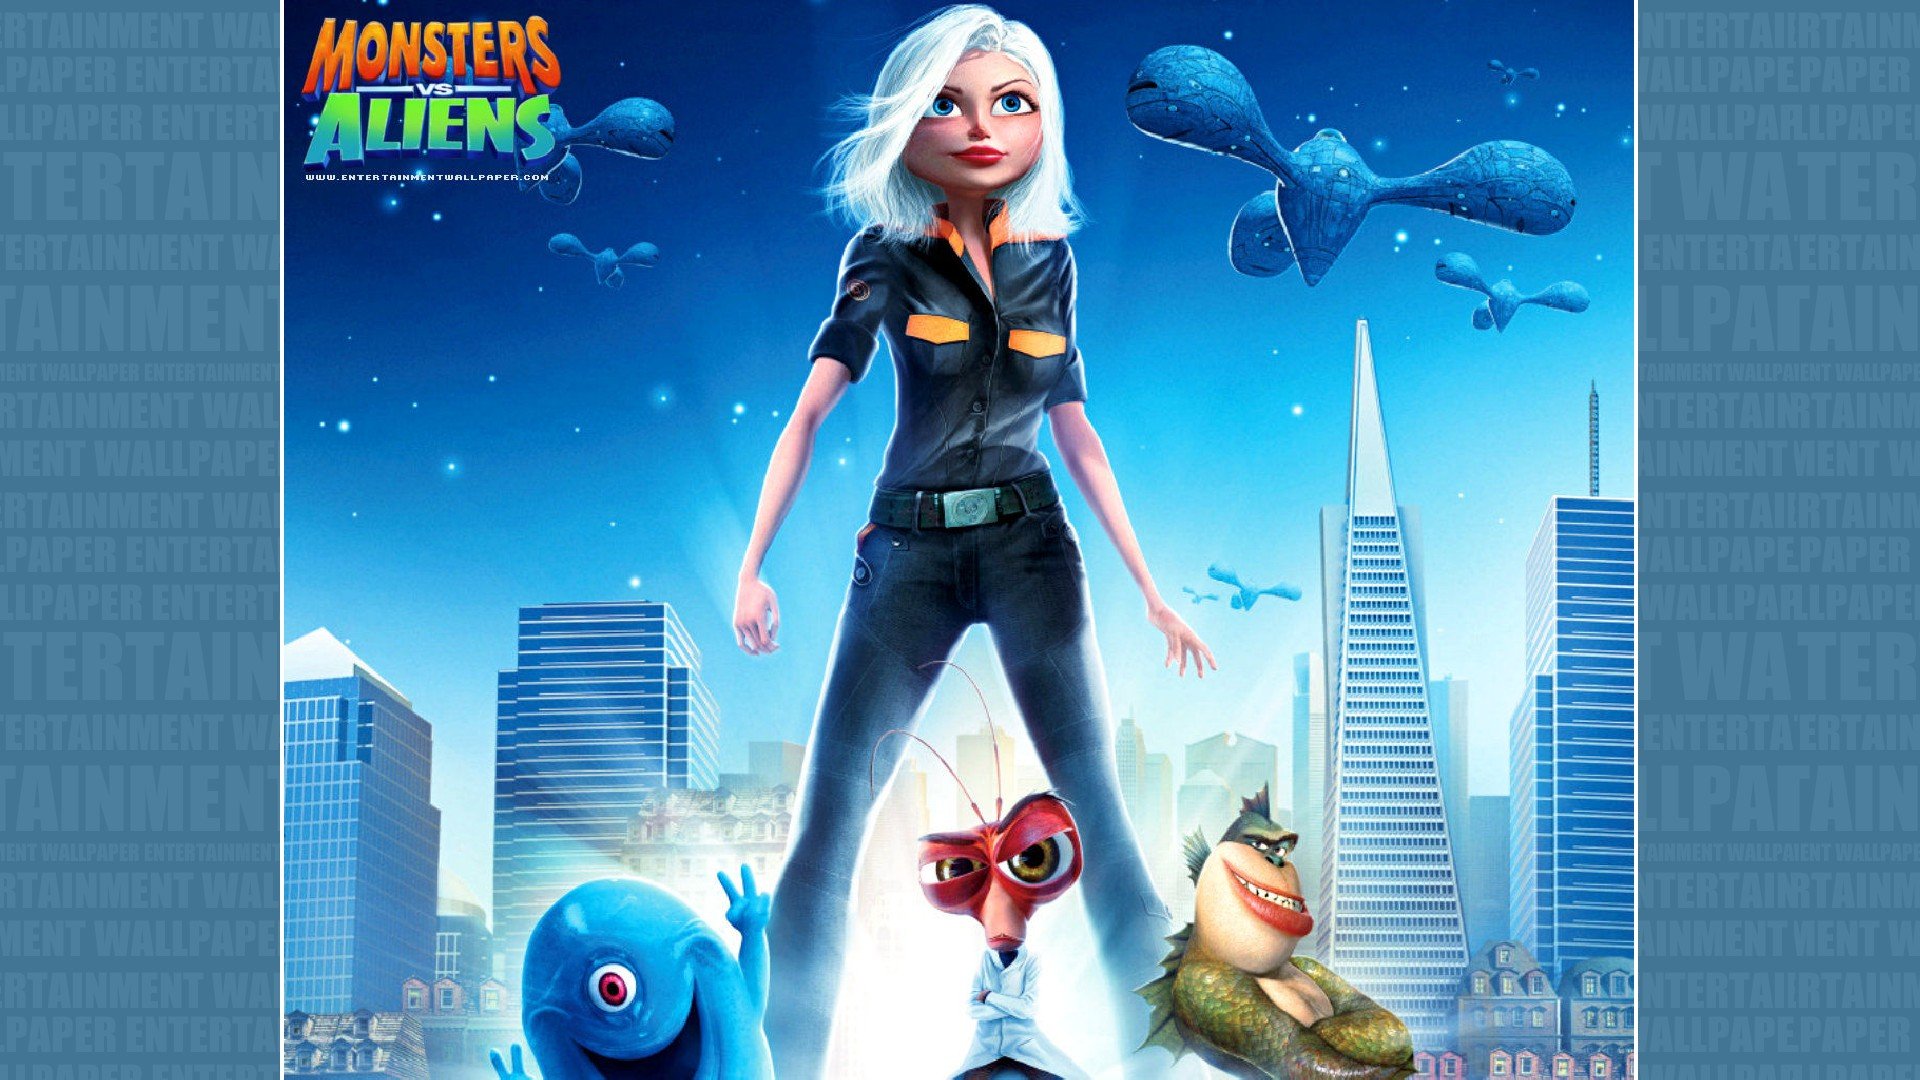 monsters vs aliens, Cartoon, Animation, Sci fi, Monsters, Aliens, Monster,  Alien, Film, Movie, 13 Wallpapers HD / Desktop and Mobile Backgrounds